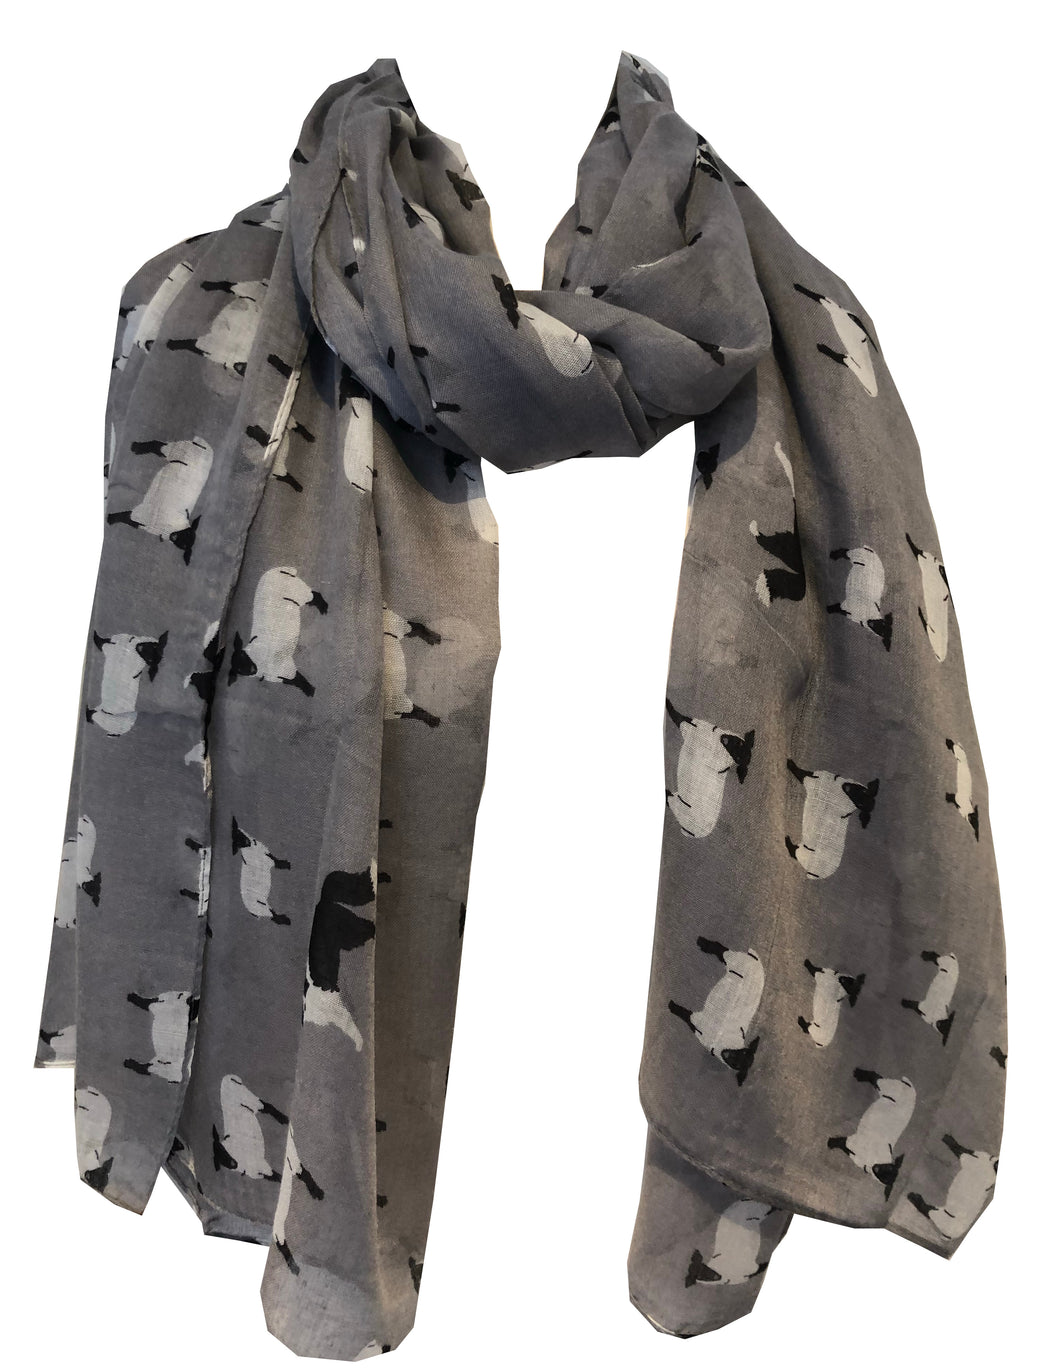 Grey Sheep Design Long Scarf, Great for Presents/Gifts for Sheep Lovers.